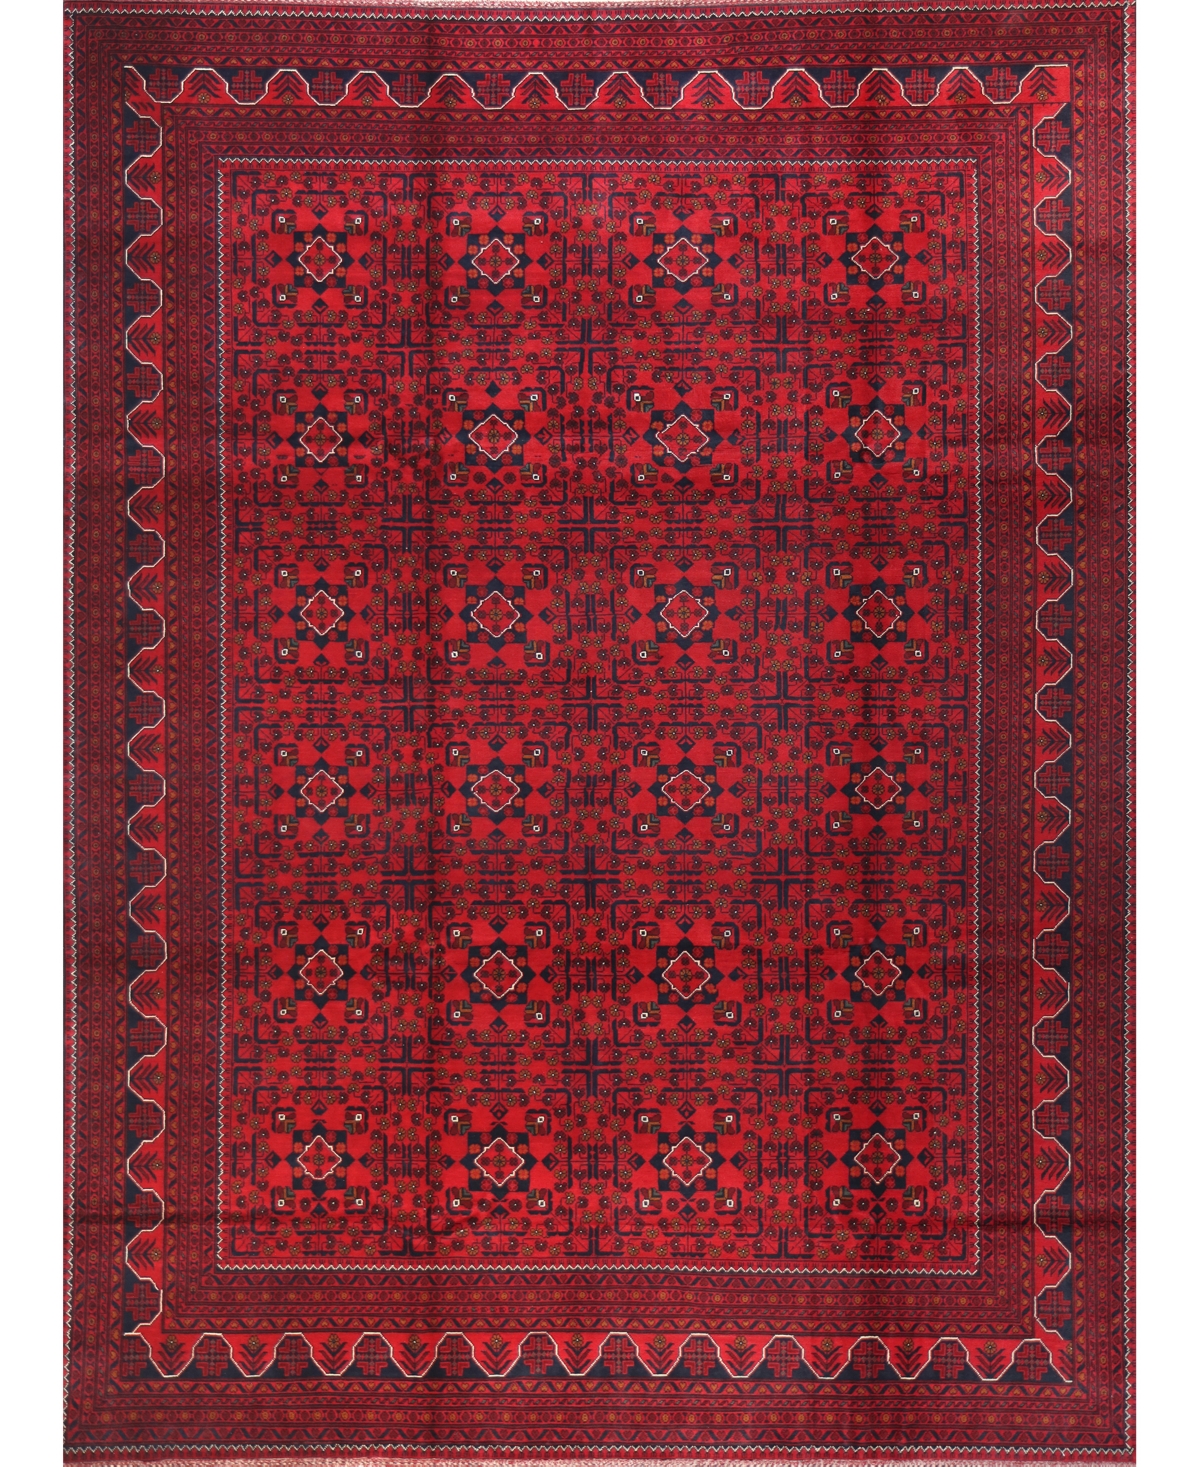 Bb Rugs One of a Kind Fine Beshir 8'2in x 11'9in Area Rug - Red